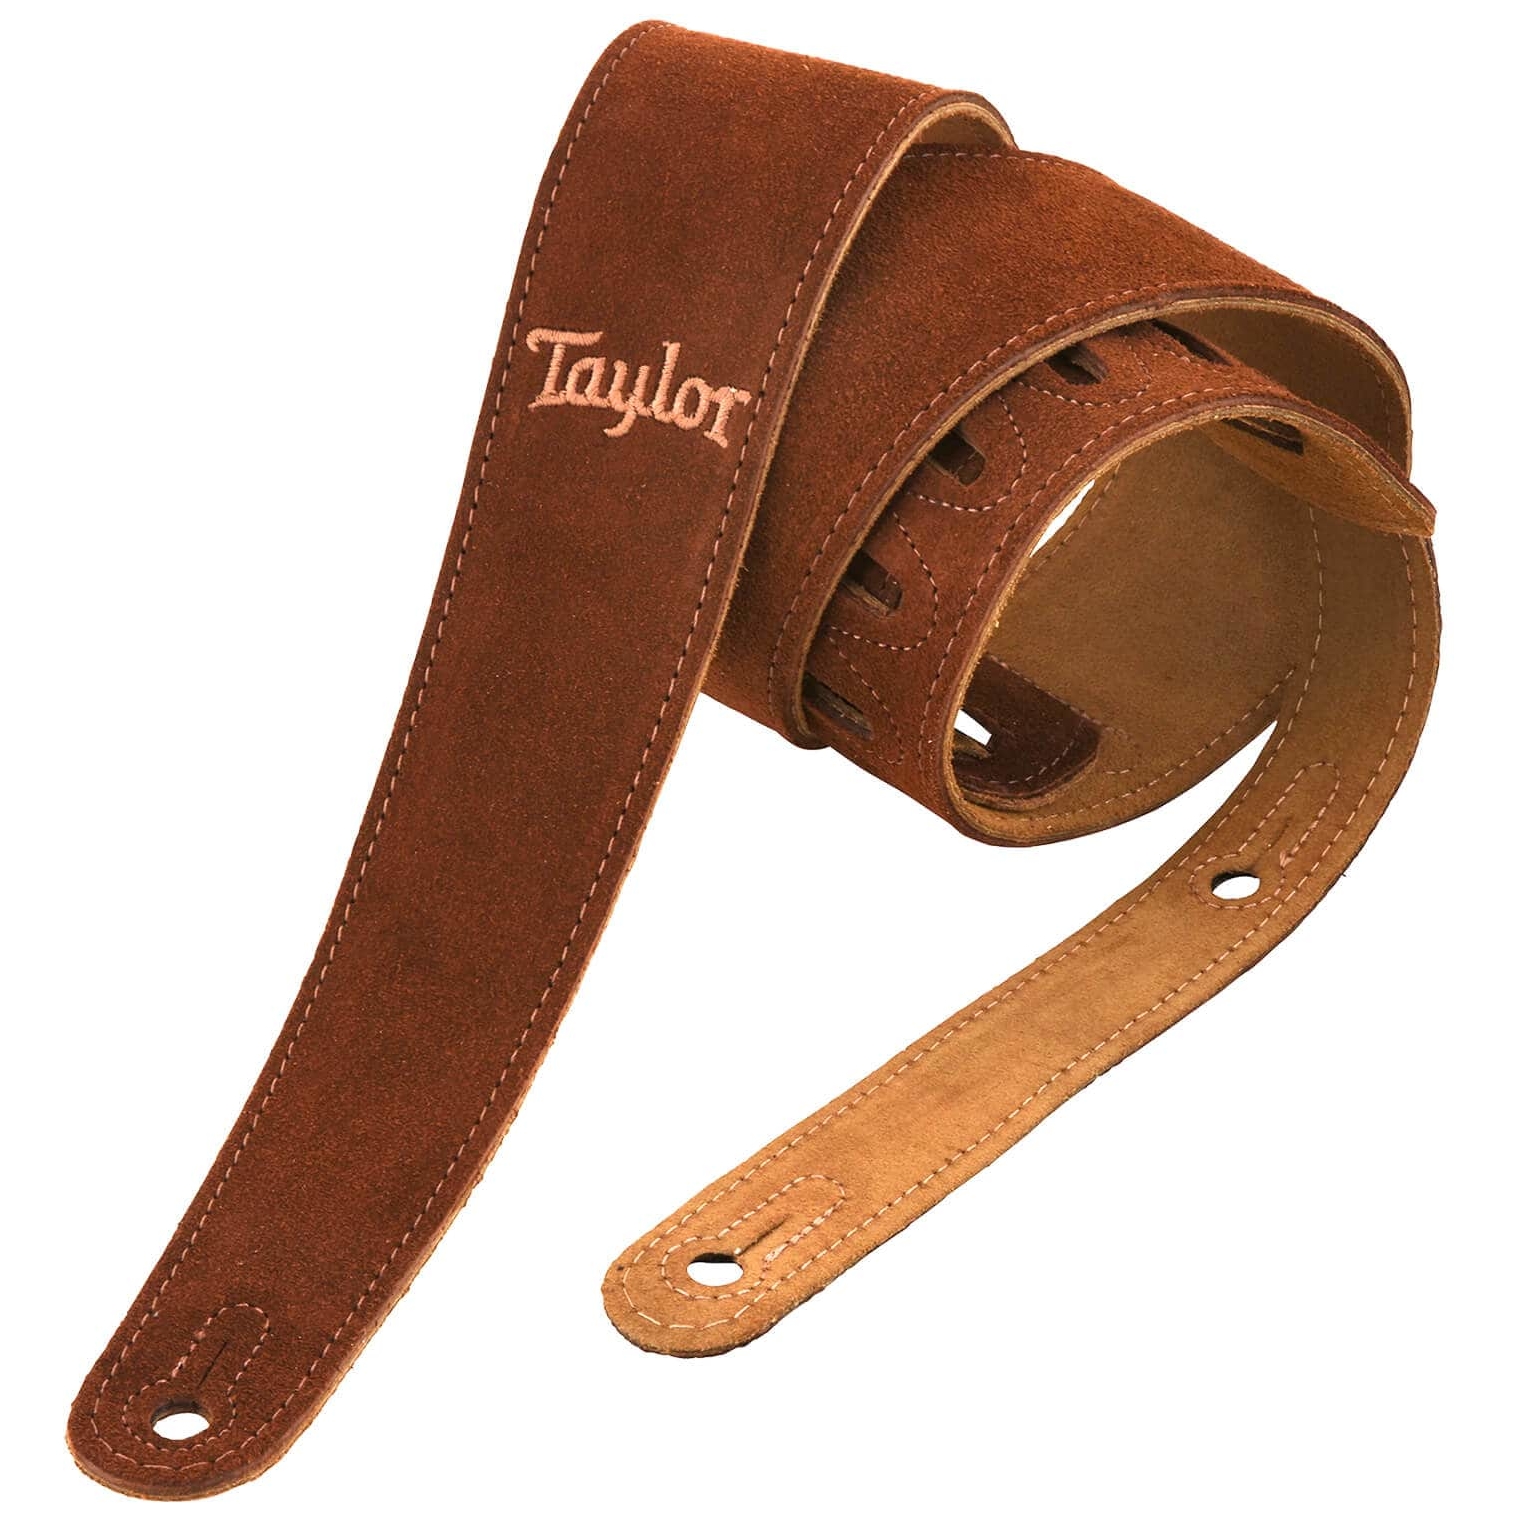 Taylor Strap Suede Chocolate Brown